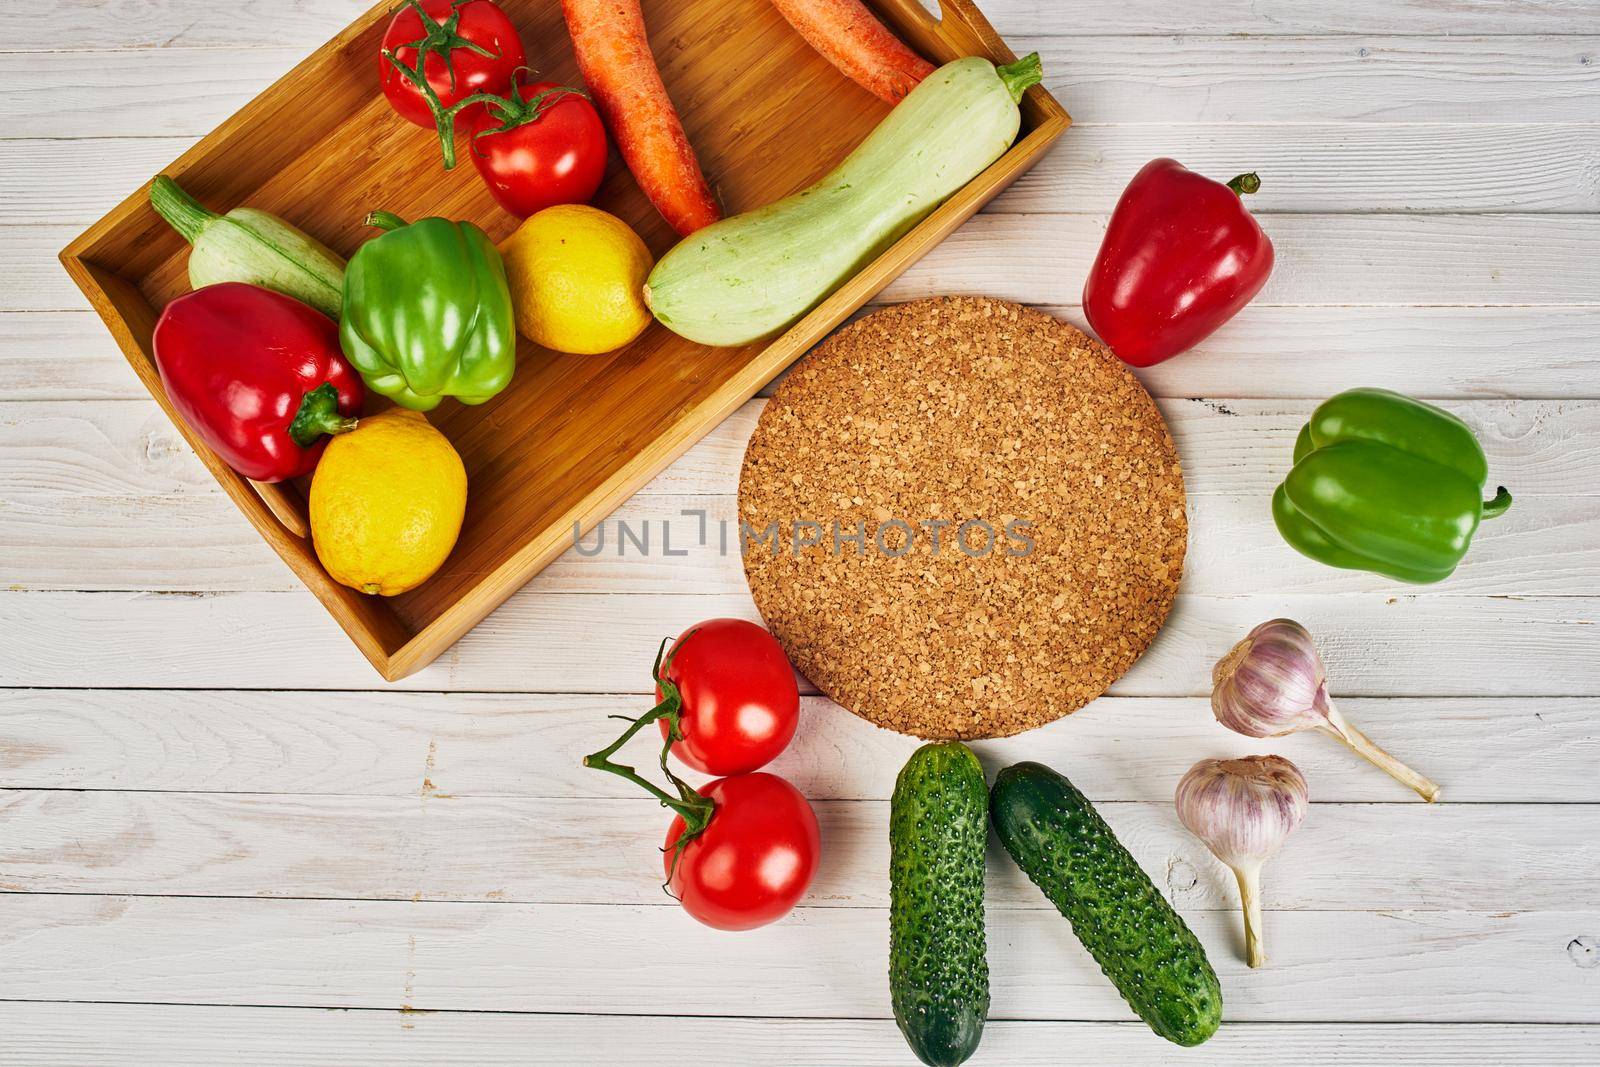 Ingredients natural product summer season agriculture view from above. High quality photo